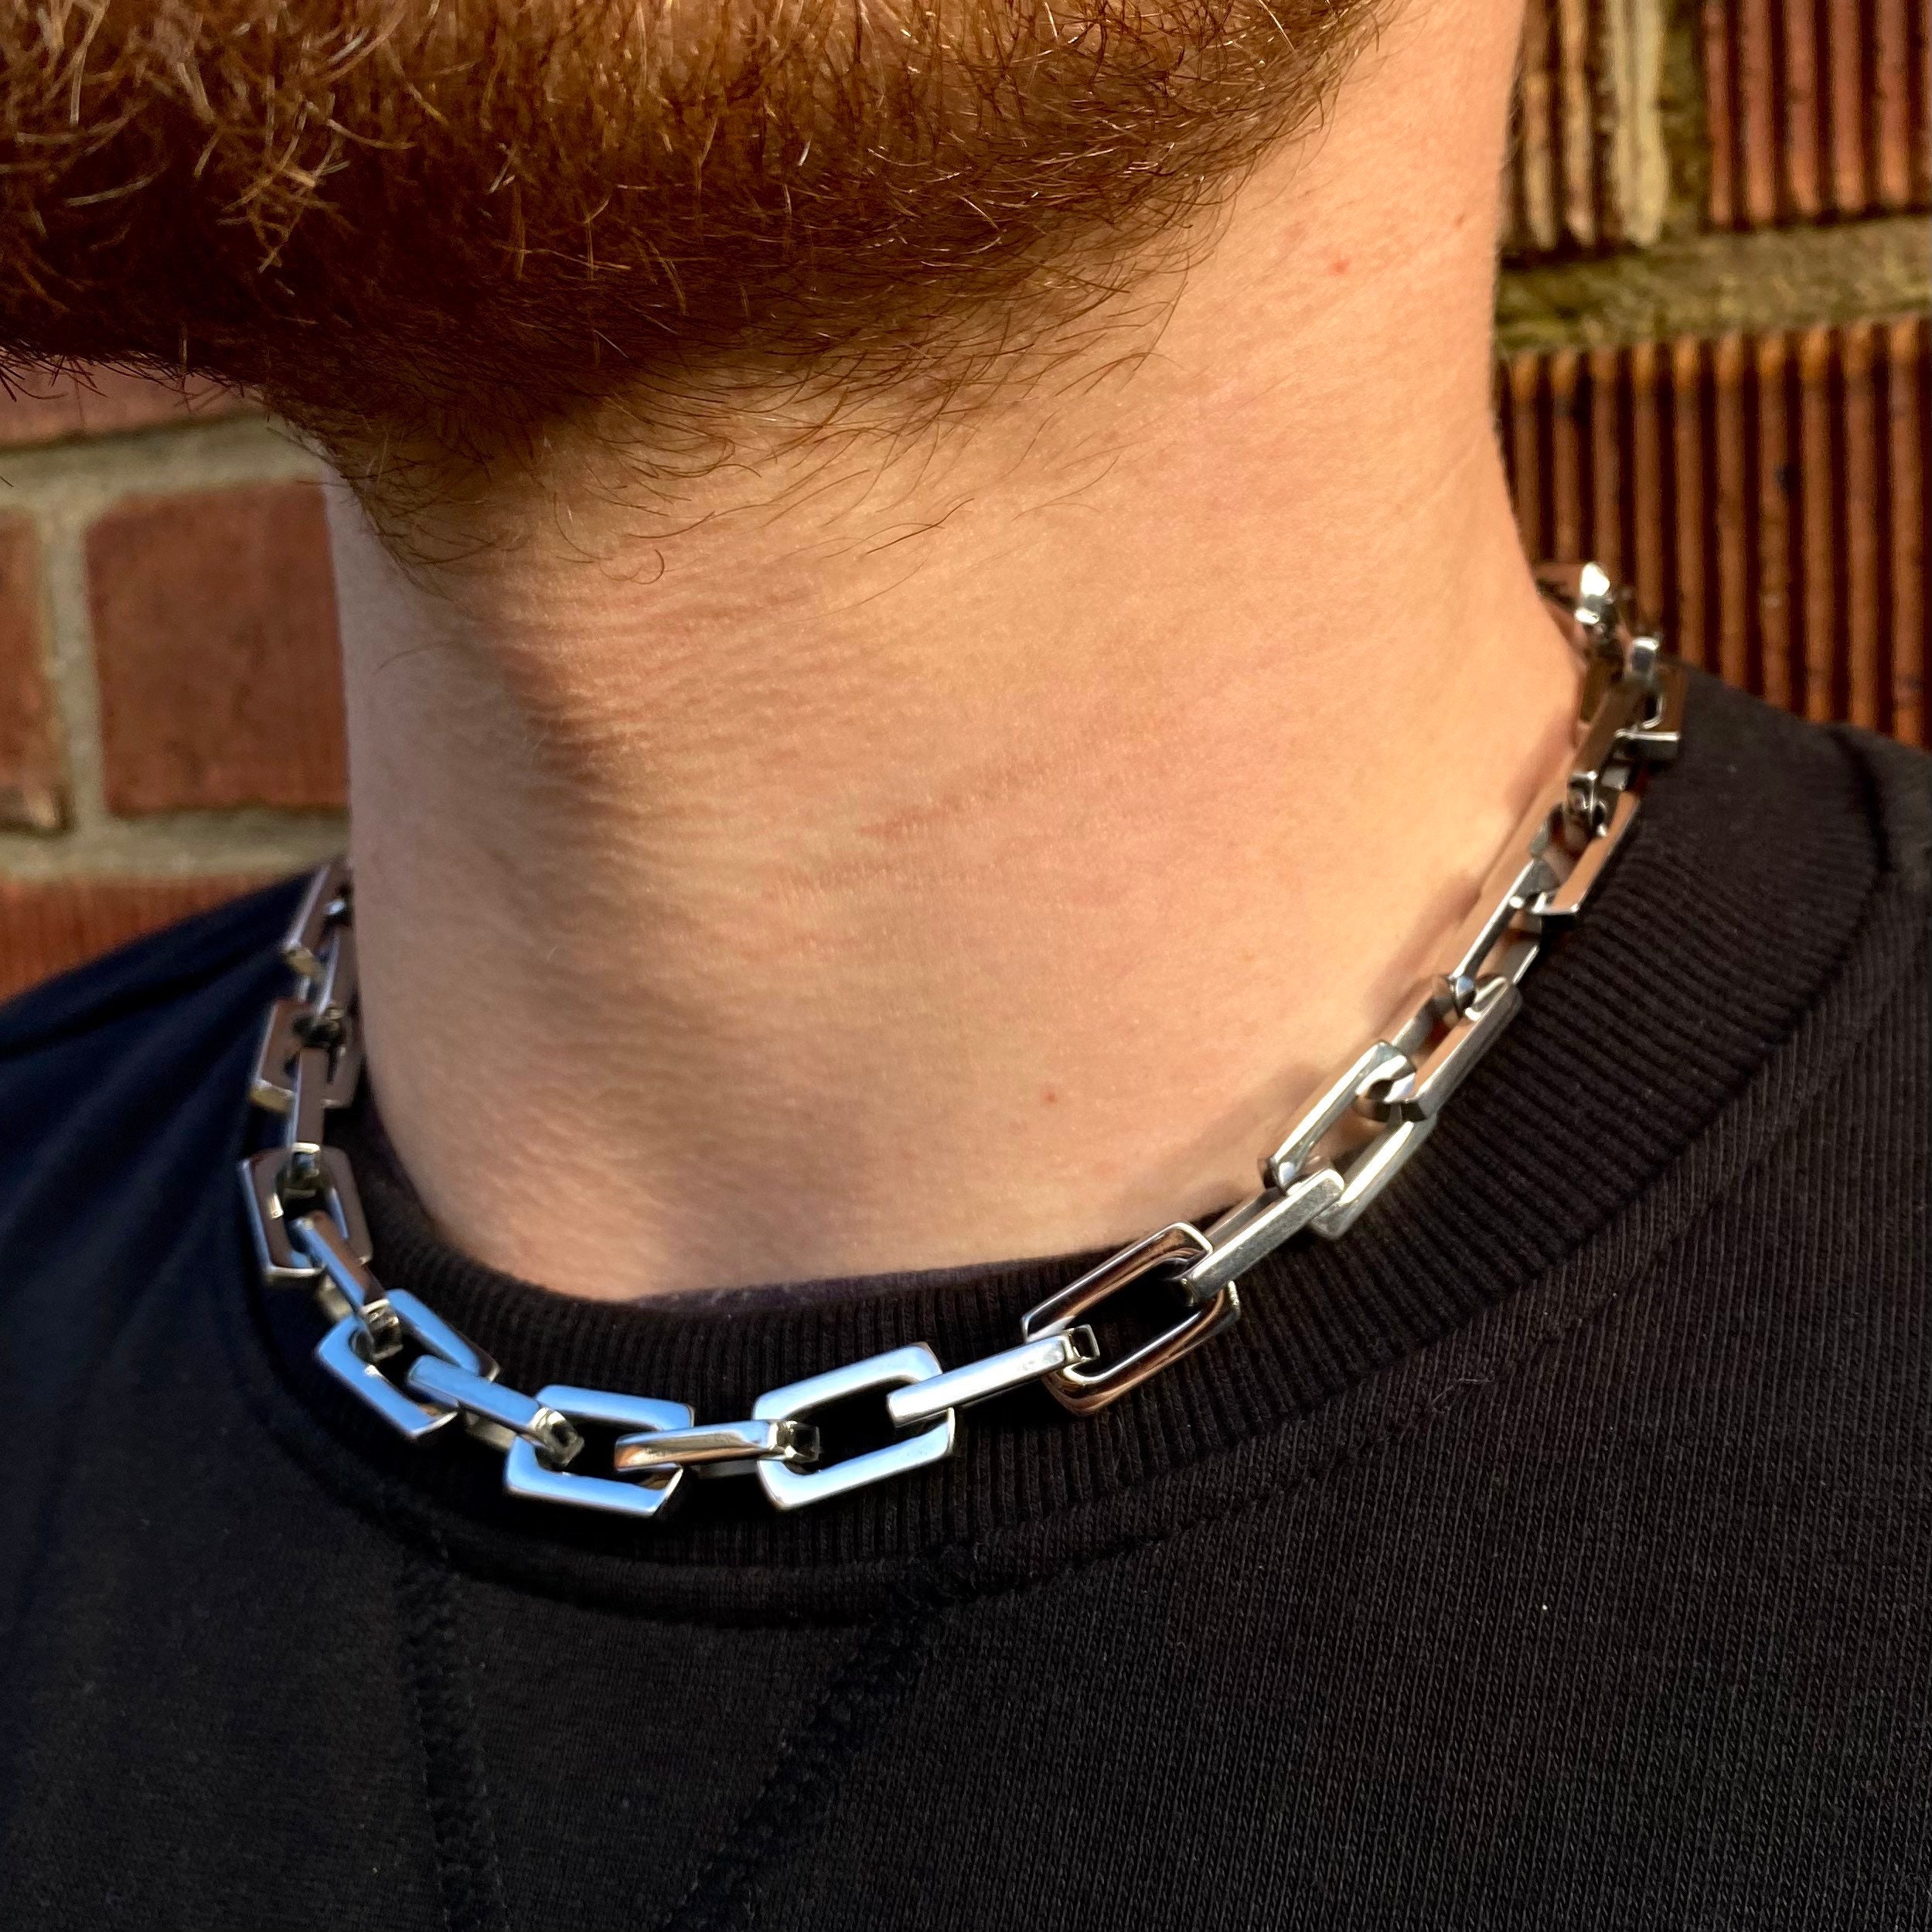 chain links necklace mens